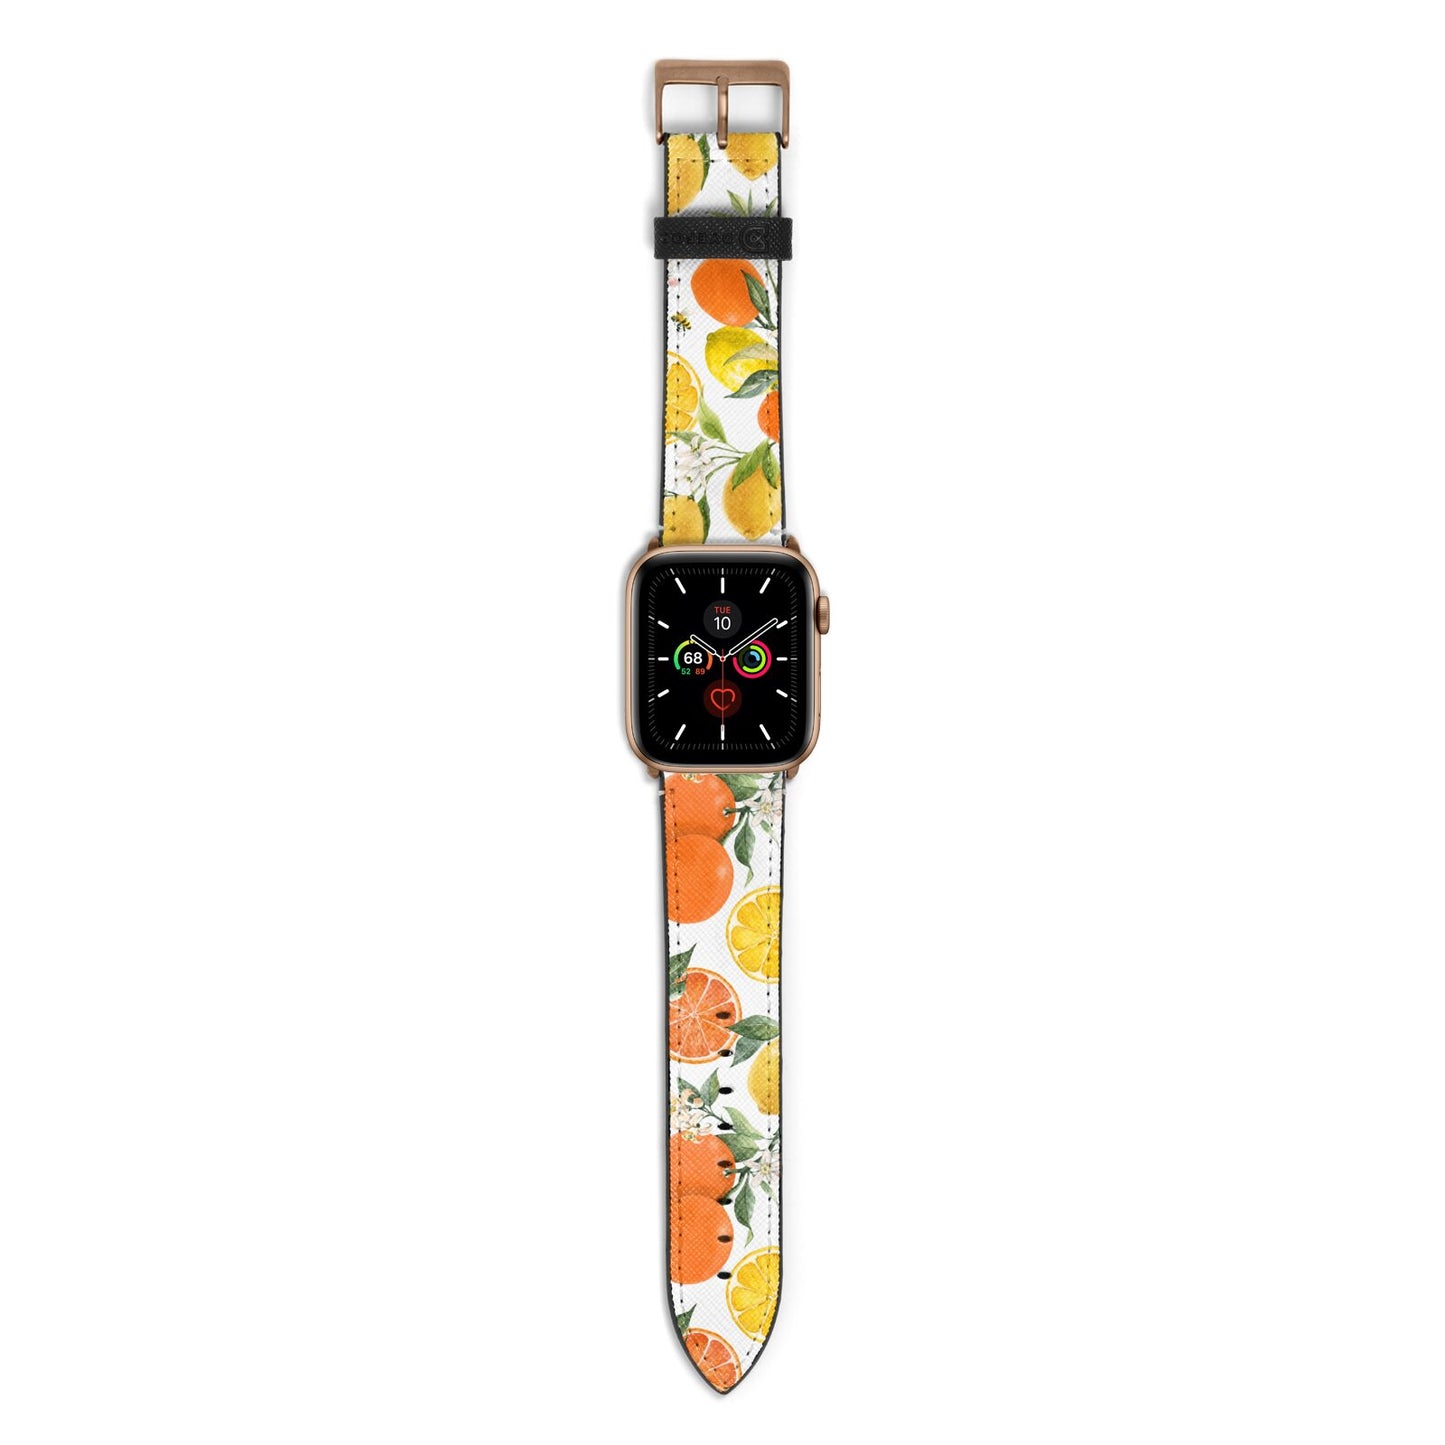 Lemons and Oranges Apple Watch Strap with Gold Hardware